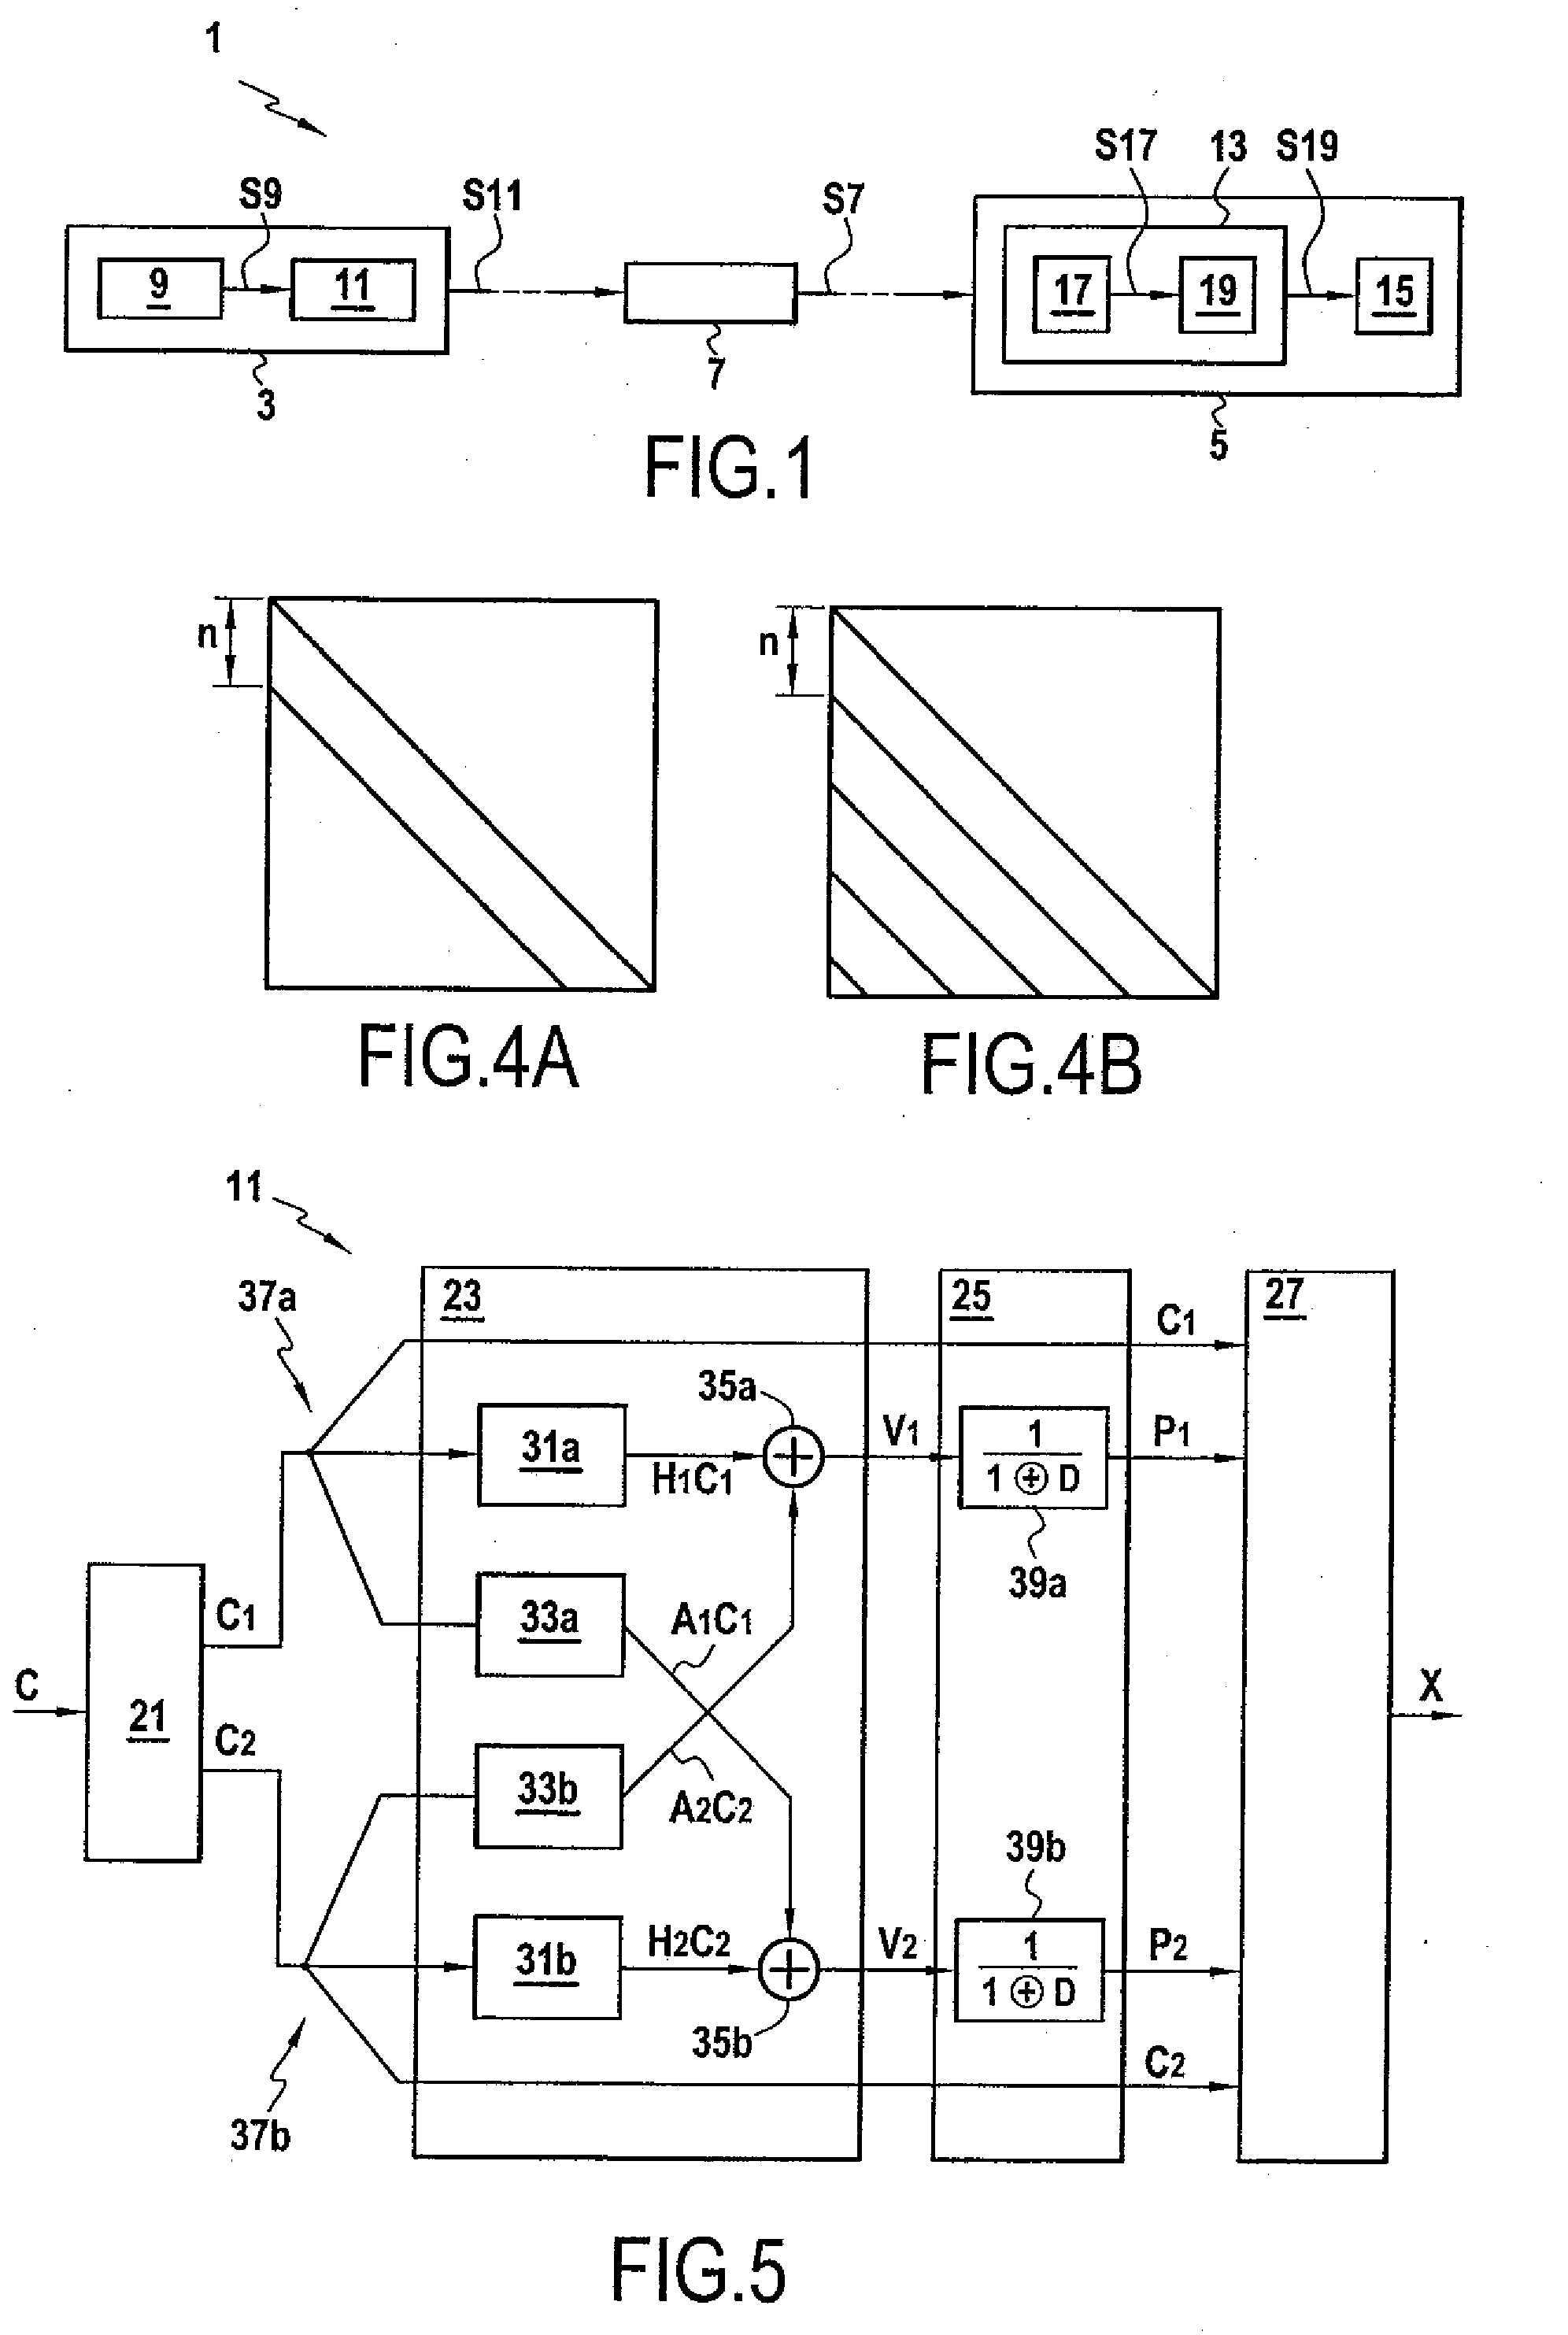 Method and System for Encoding a Data Sequence